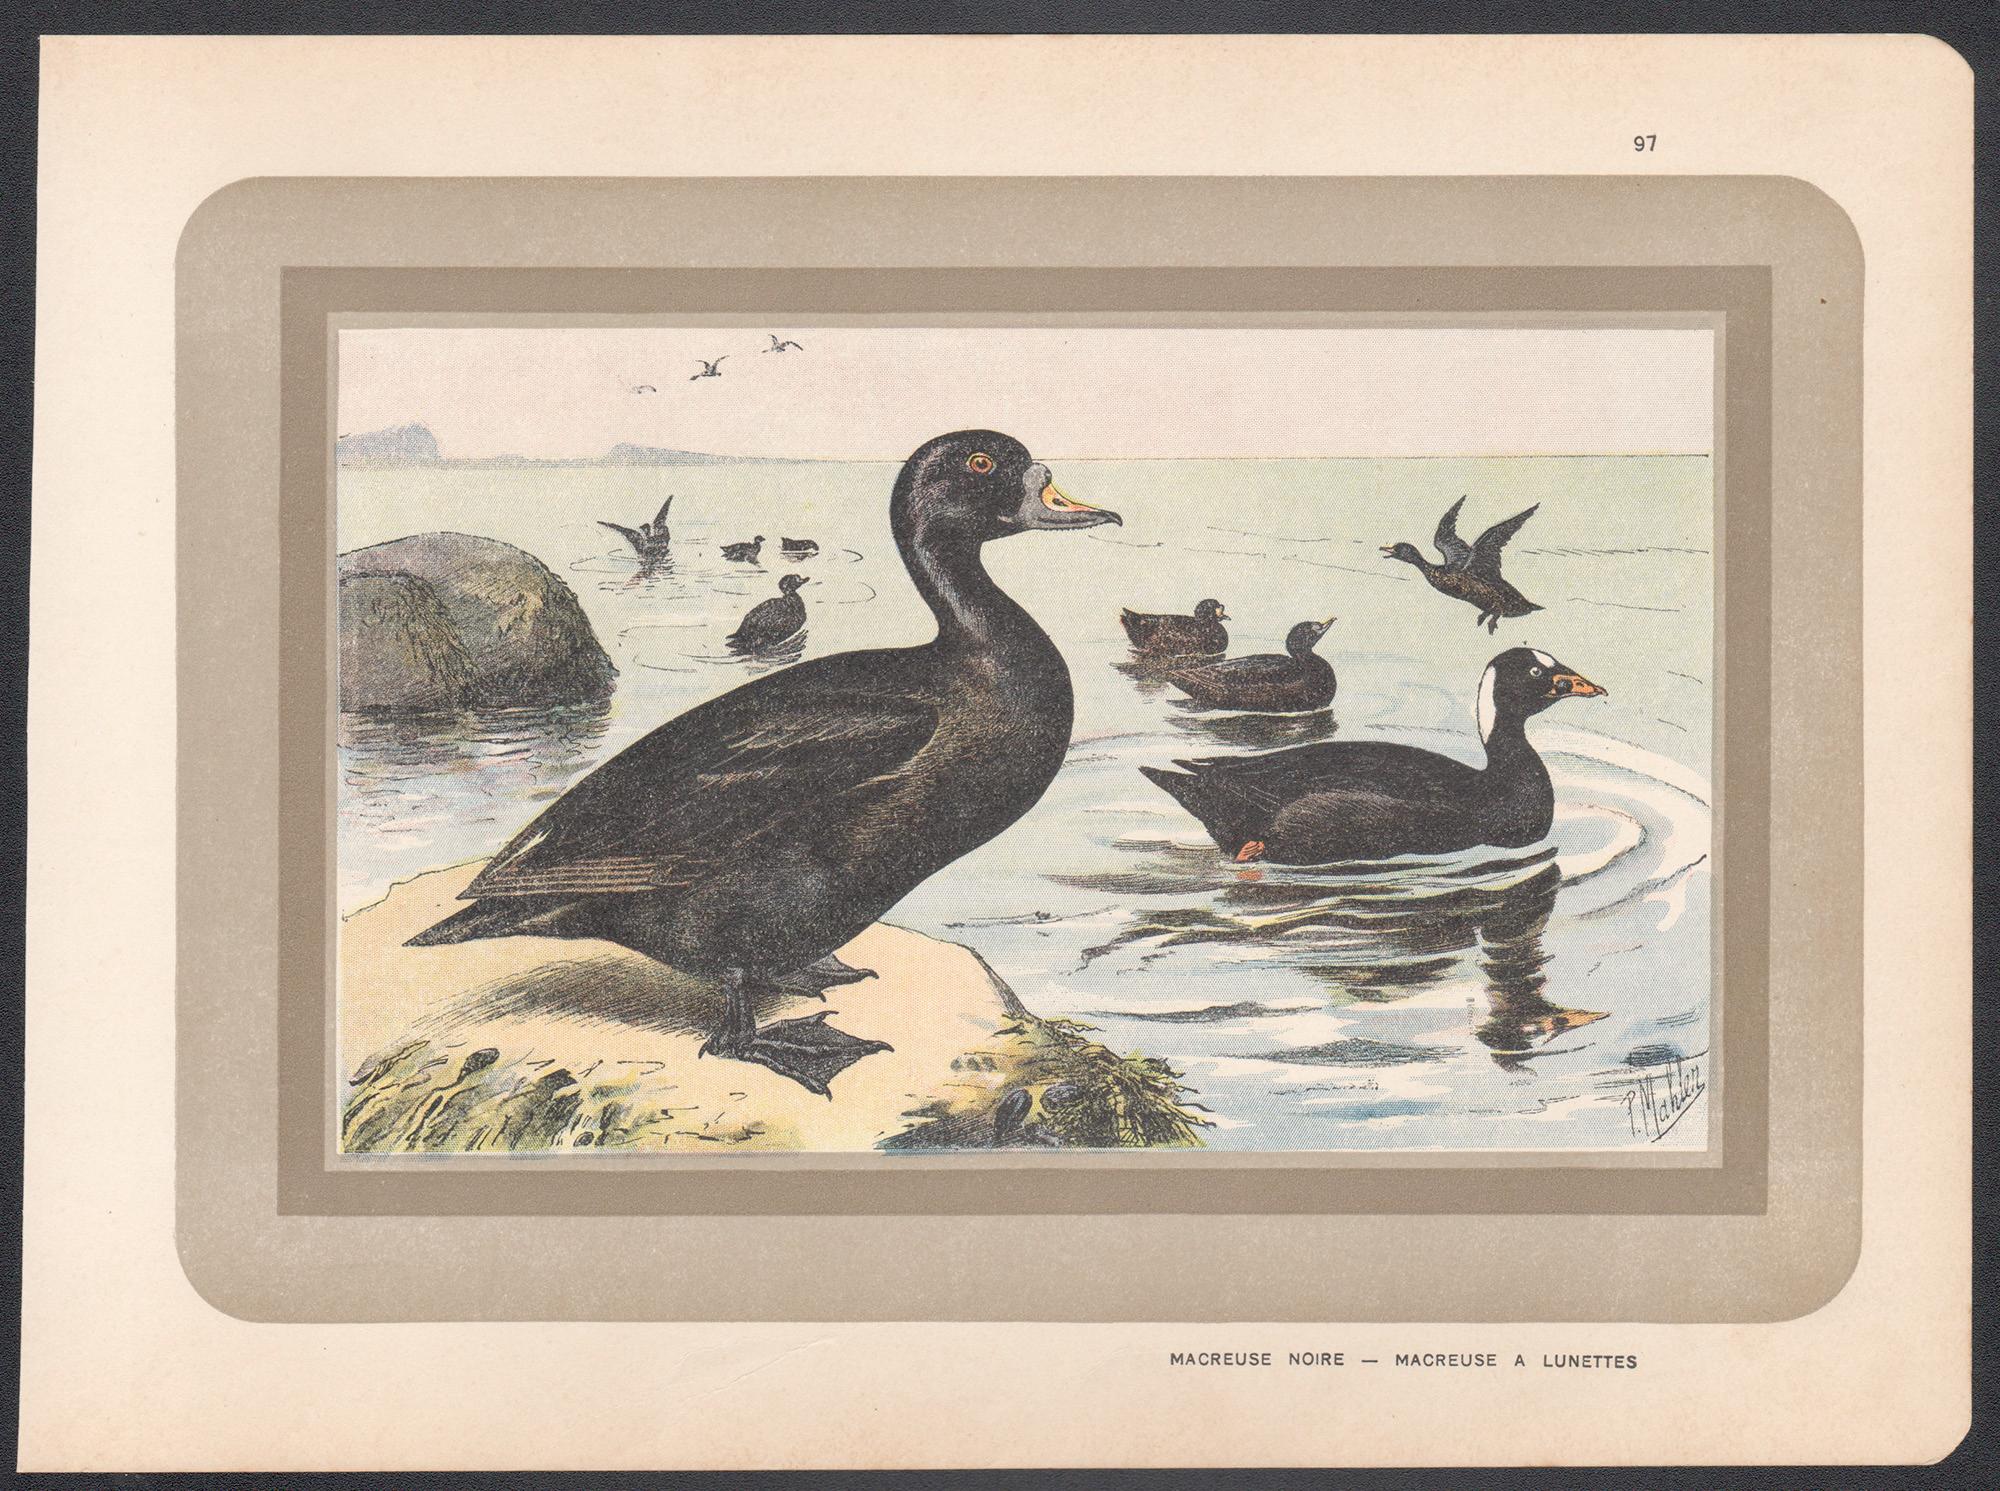 Common and Surf Scoter, French antique bird duck art illustration print - Print by P. Mahler